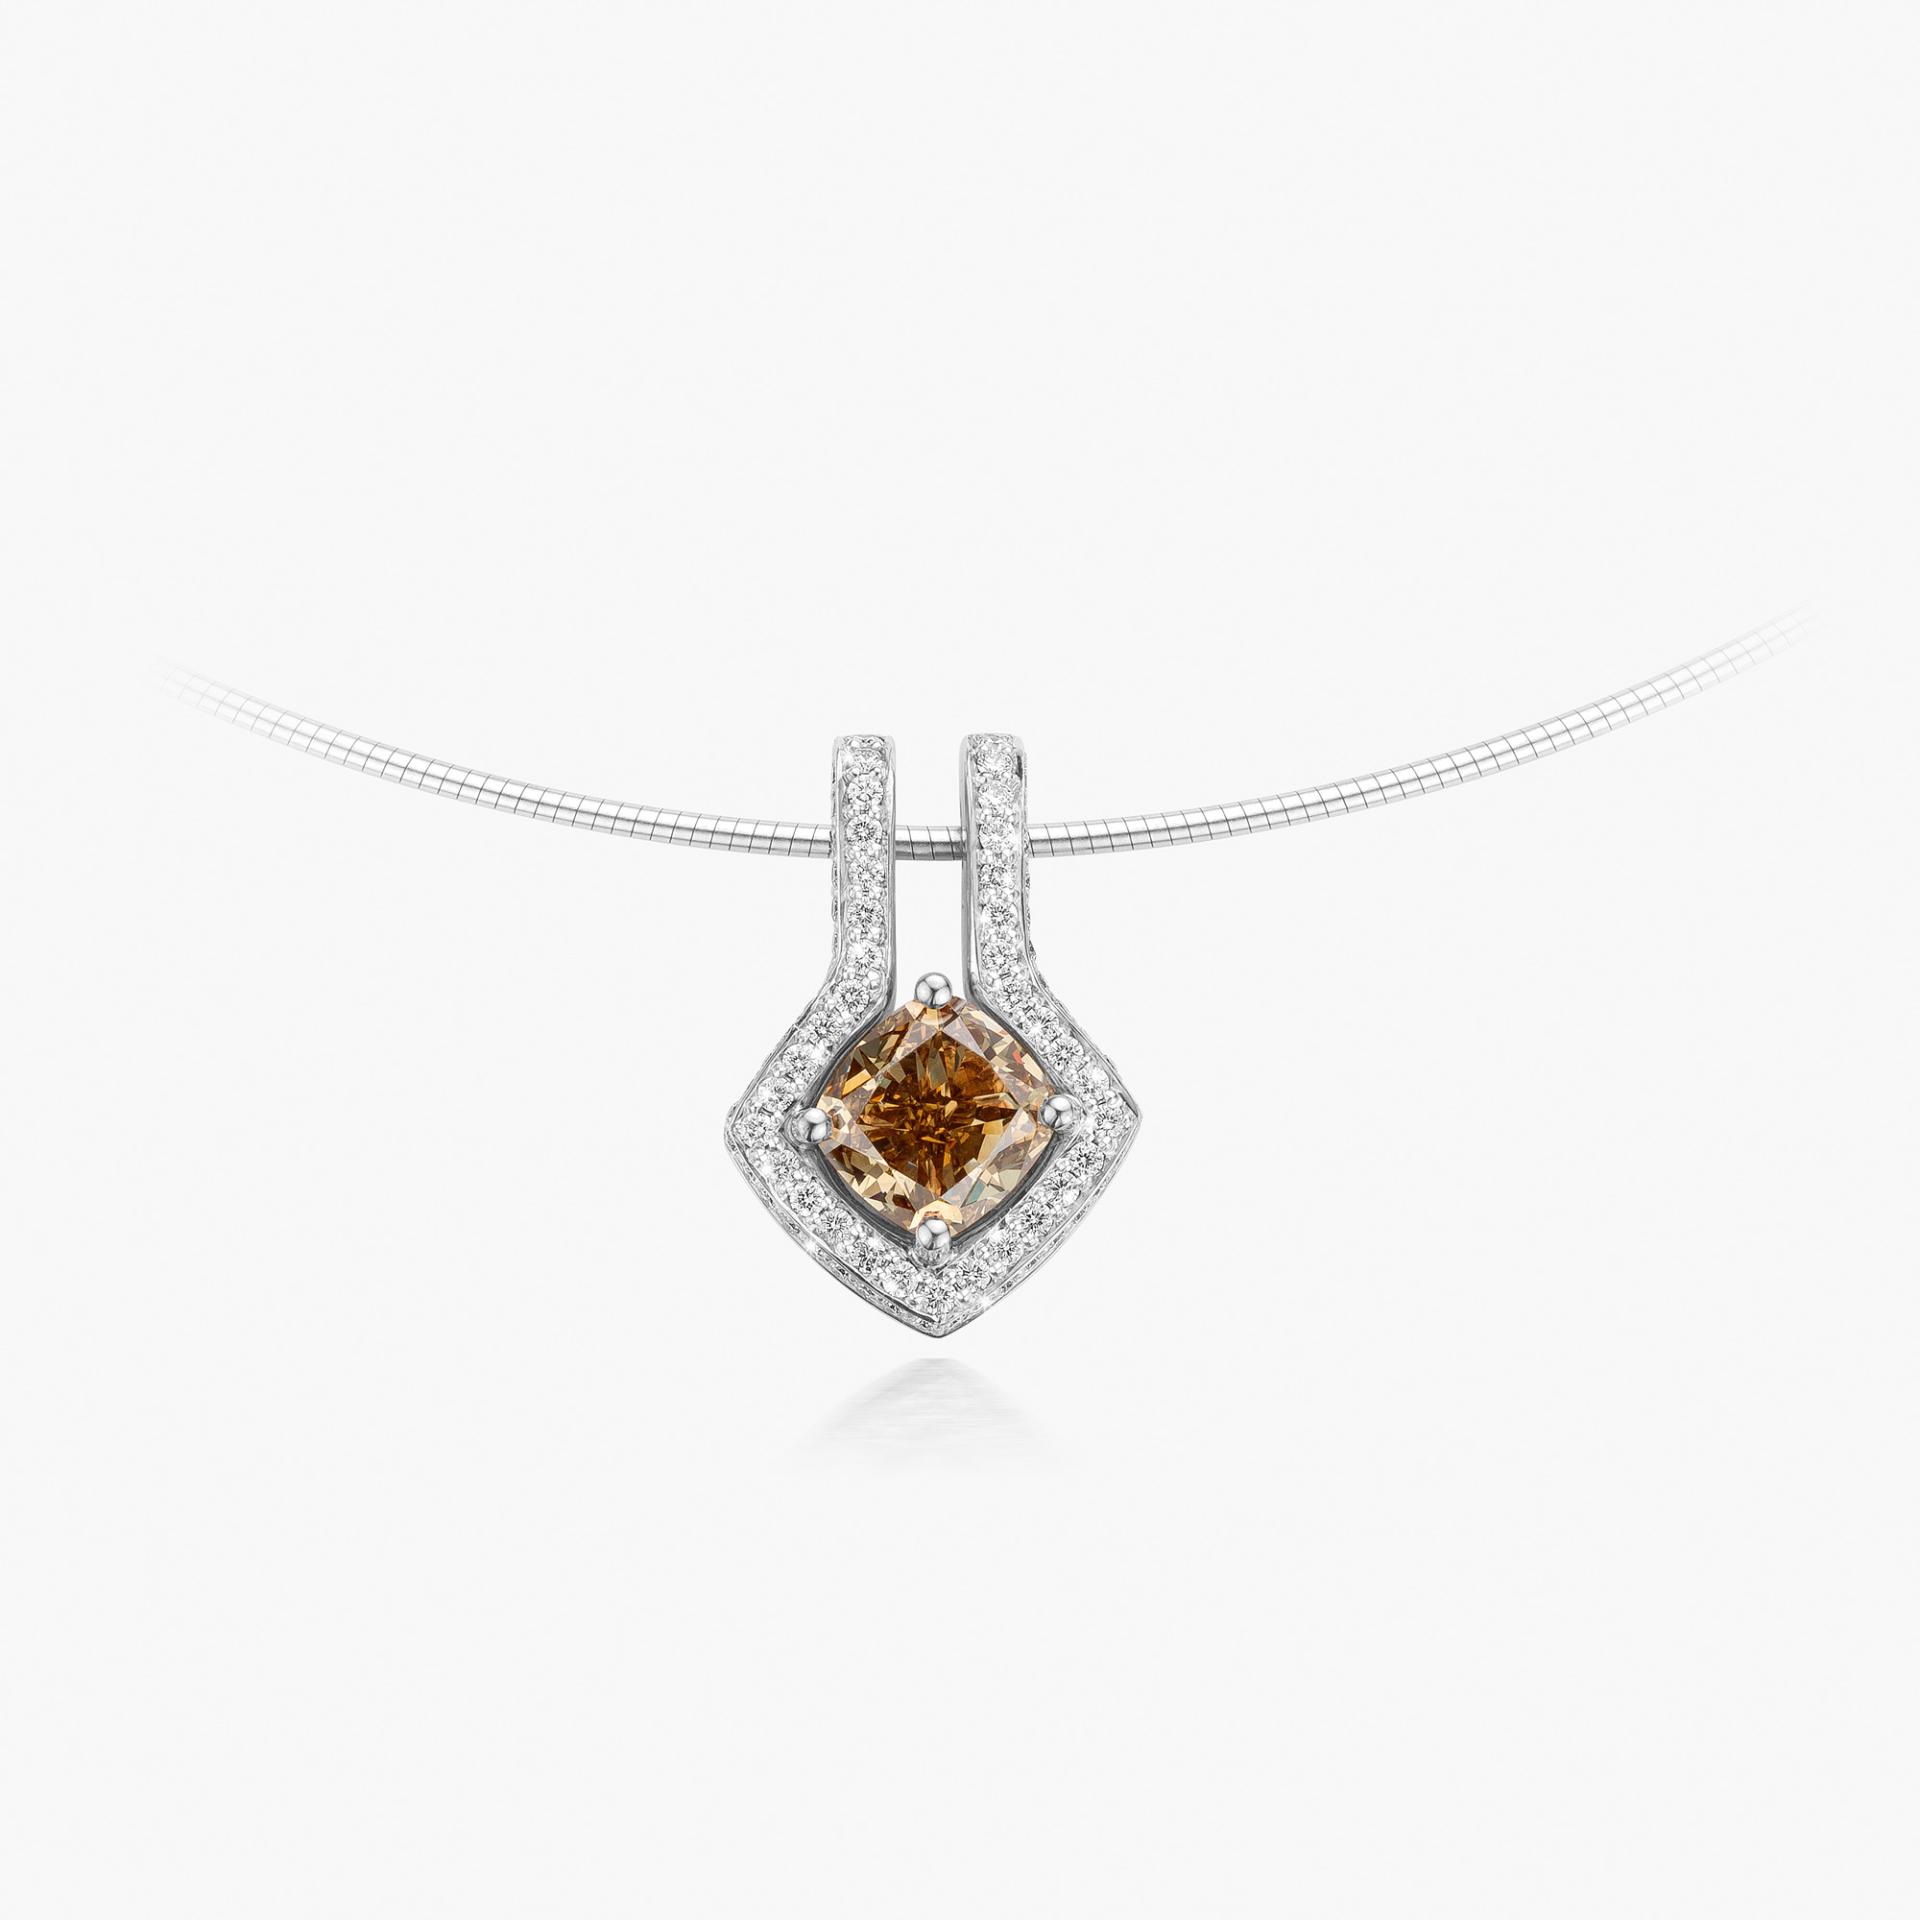 White gold pendant set with a cushion cut diamond Fancy Brown and brilliant cut diamonds made by Maison De Greef